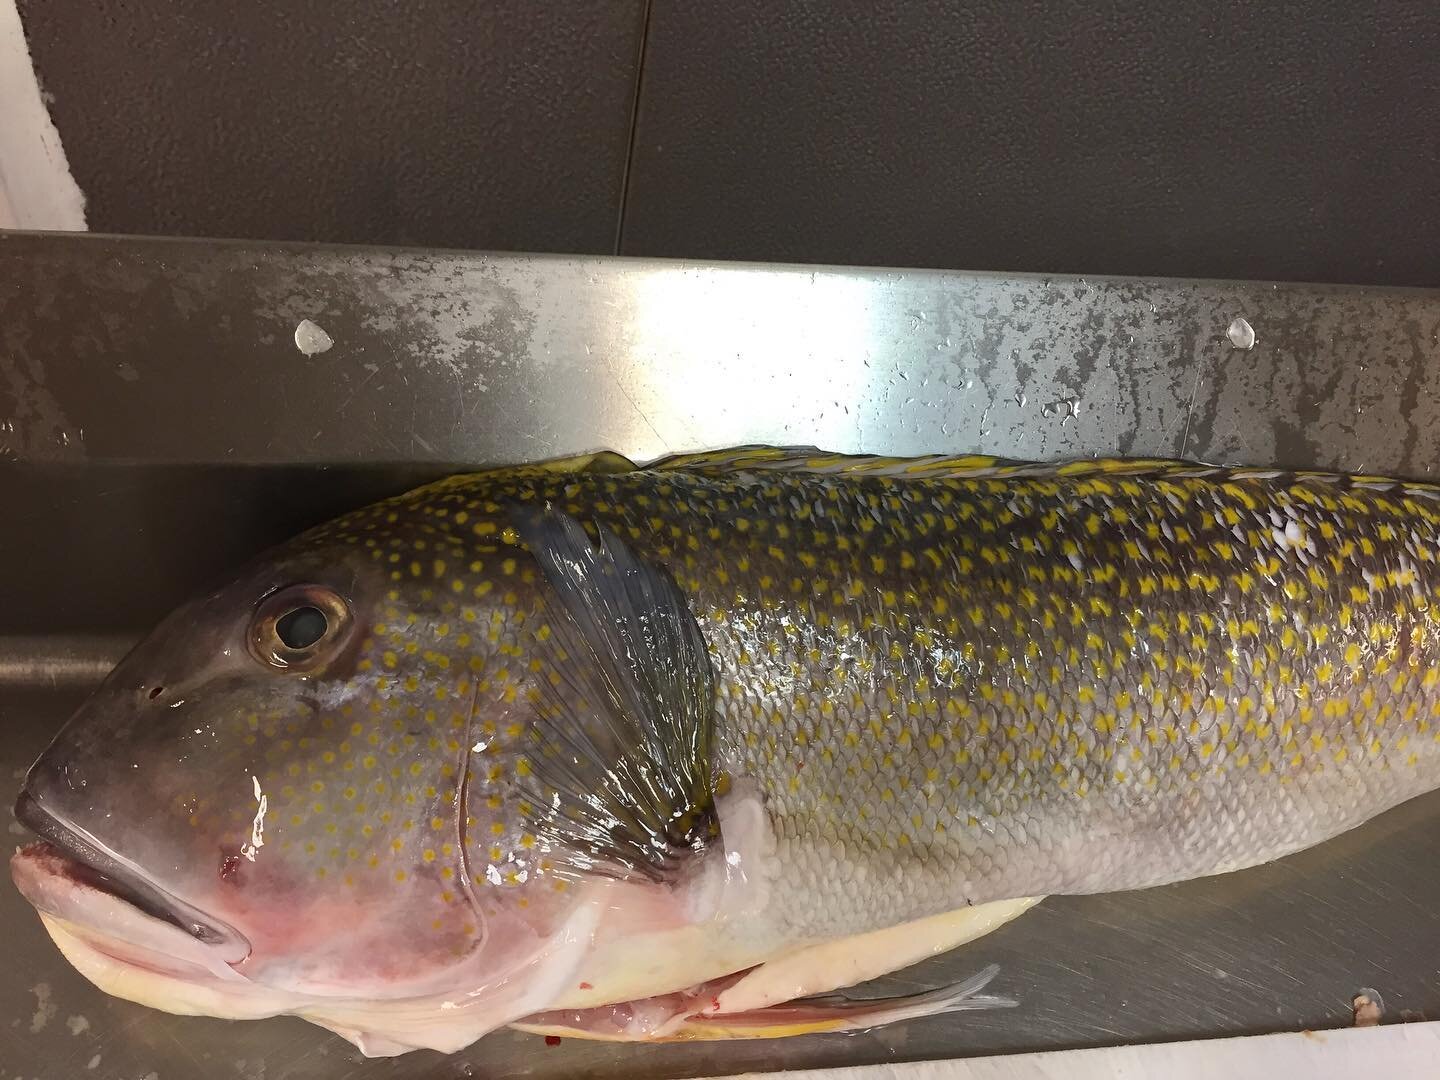 Gold tilefish in today @seaproductsnc.com